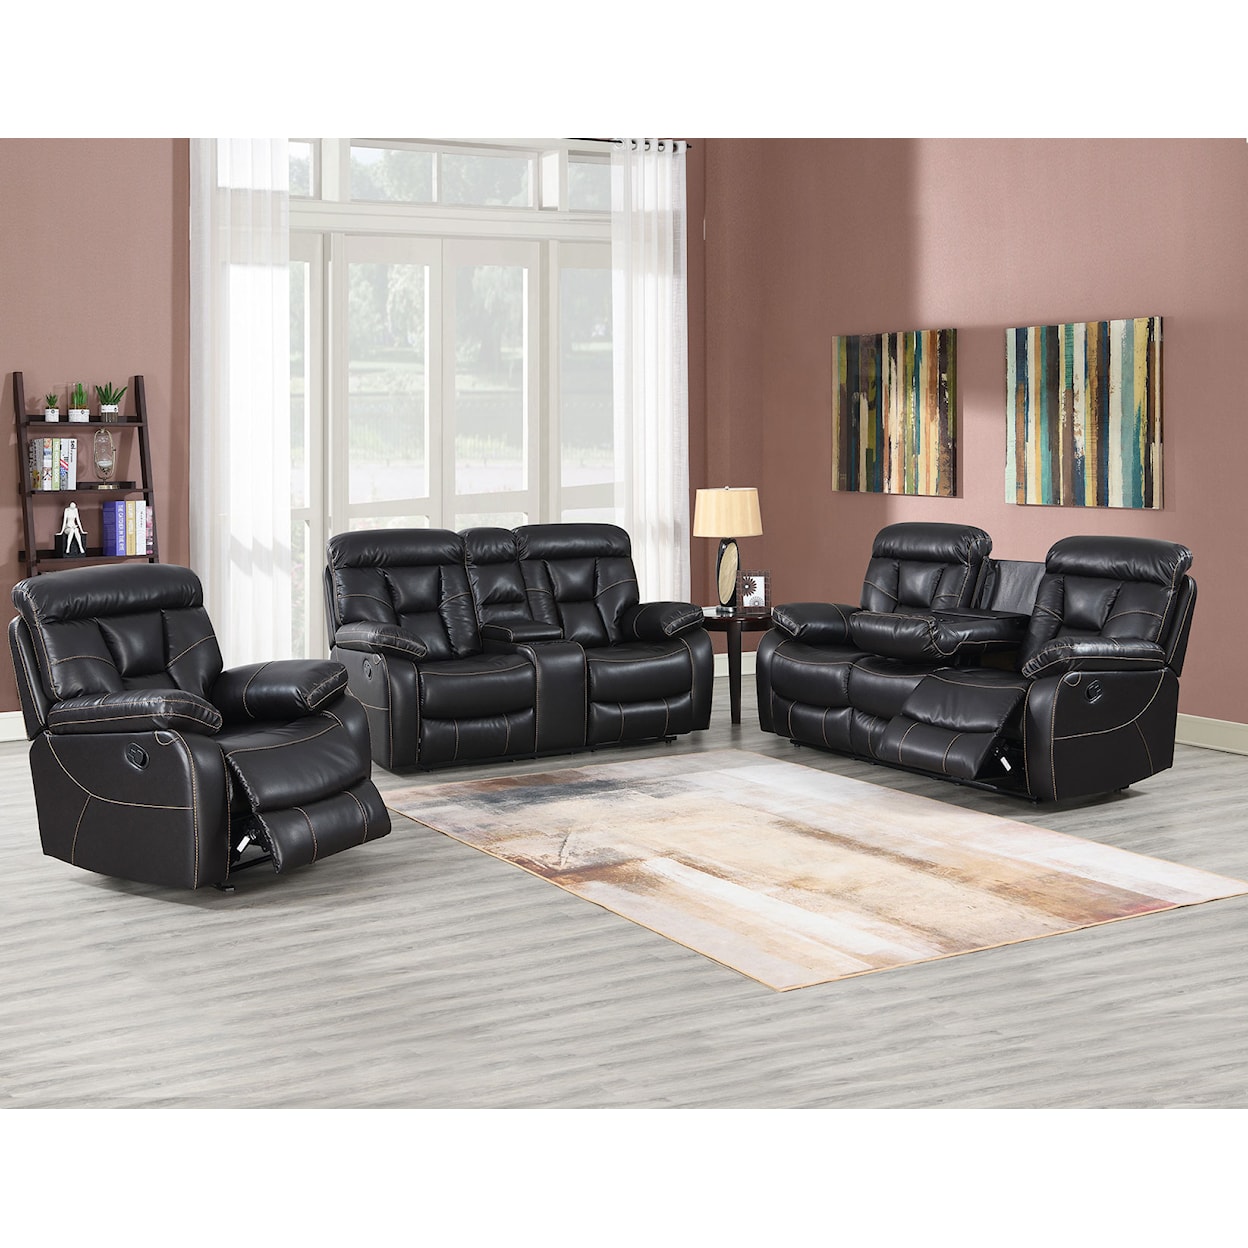 Prime Squire Manual Reclining Loveseat